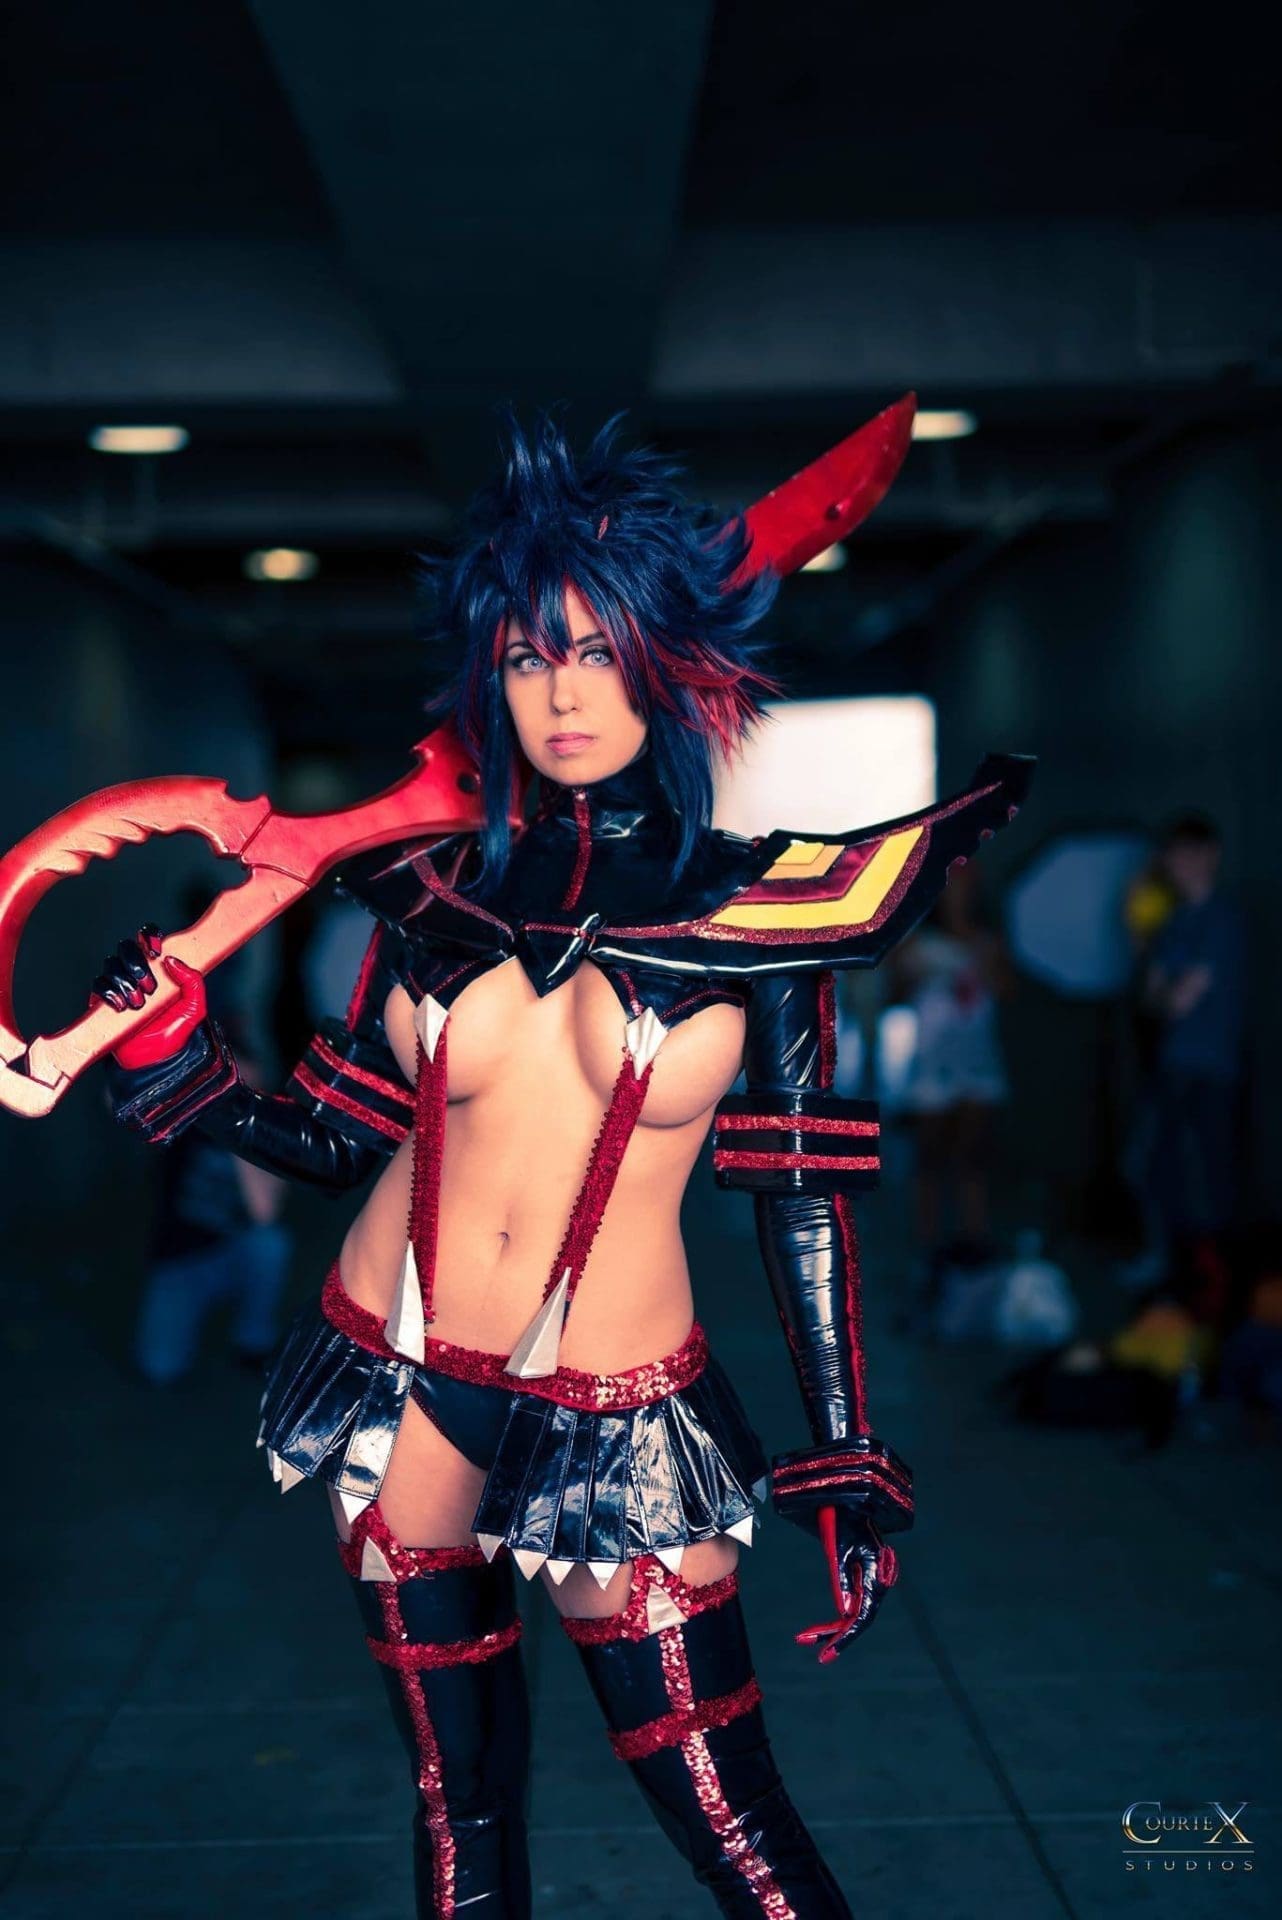 anime expo, AX, AX 2017, cosplay, cosplay corner, cosplayers, interview, photos